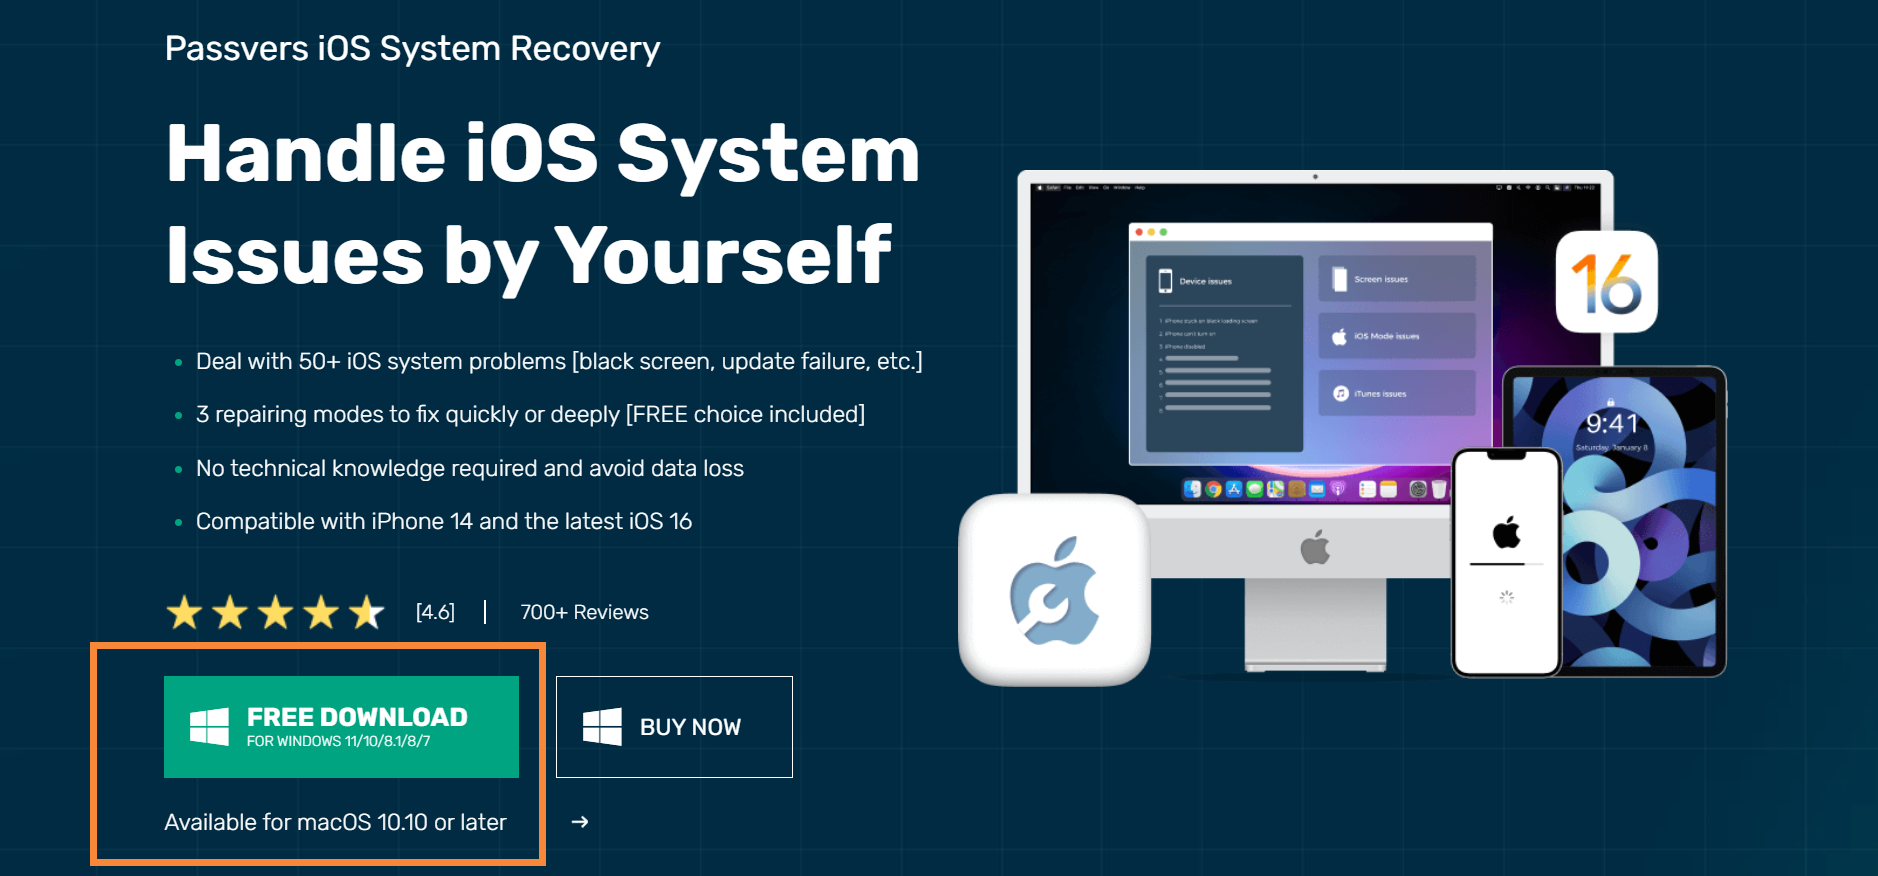 Download Passvers Ios System Recovery